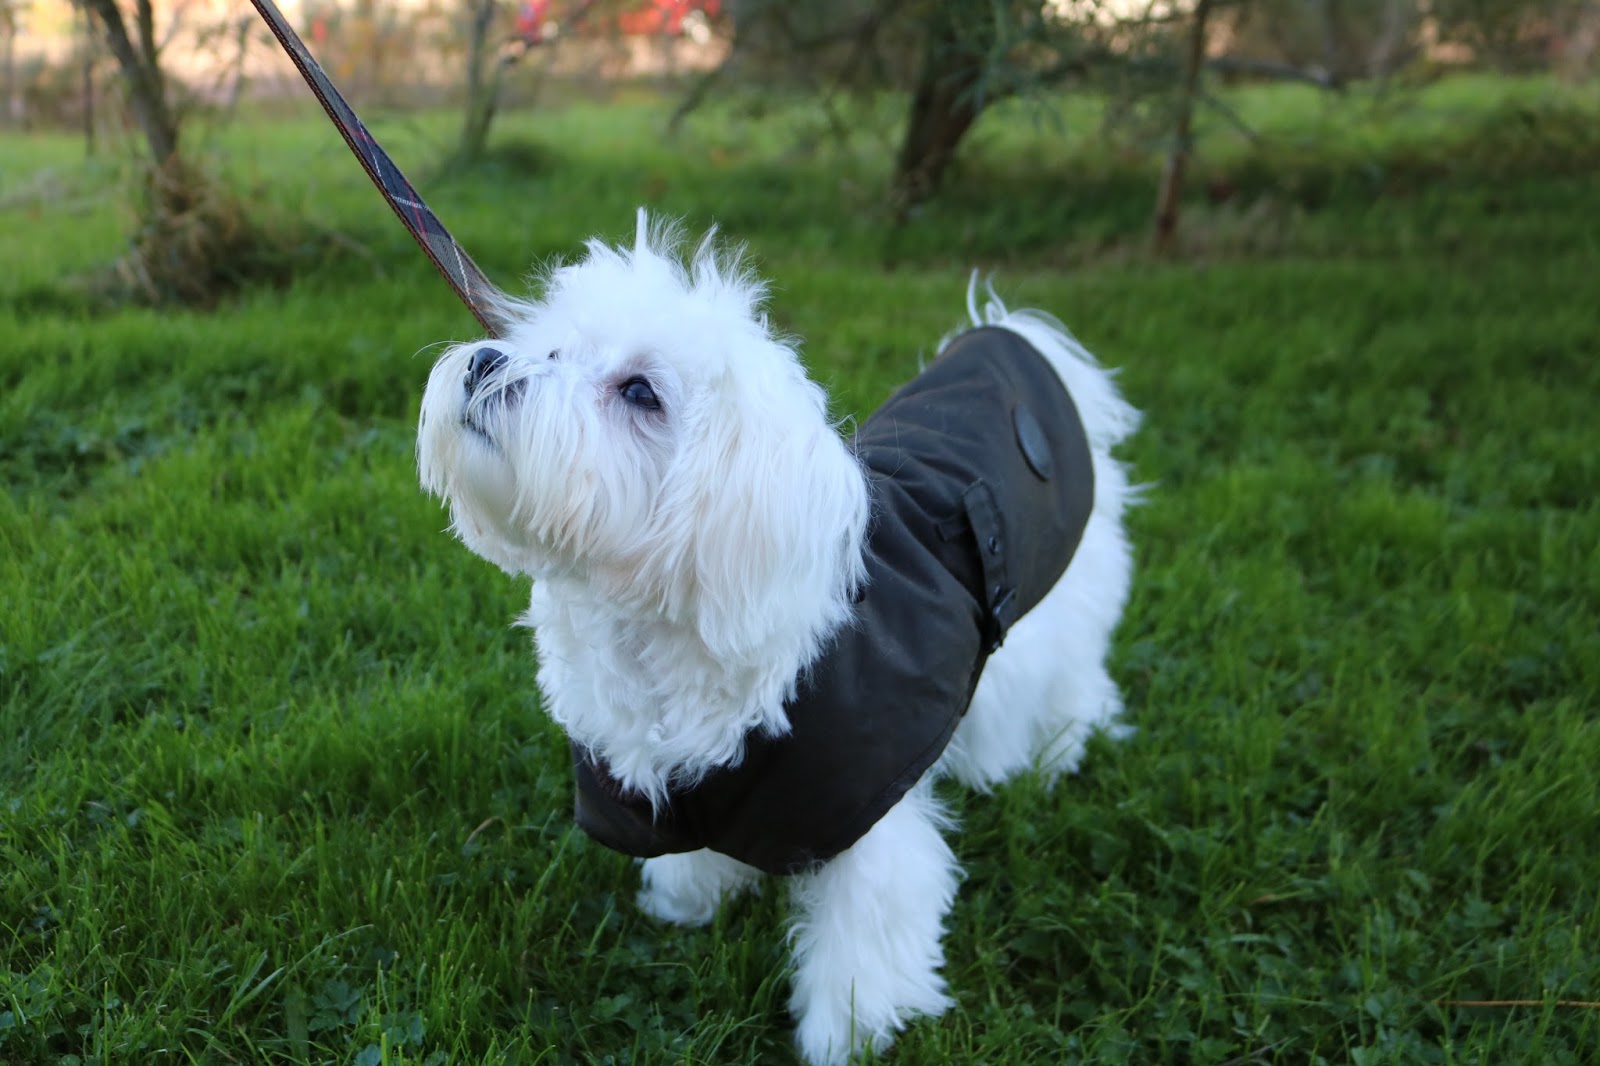 barbour dog coat with harness hole